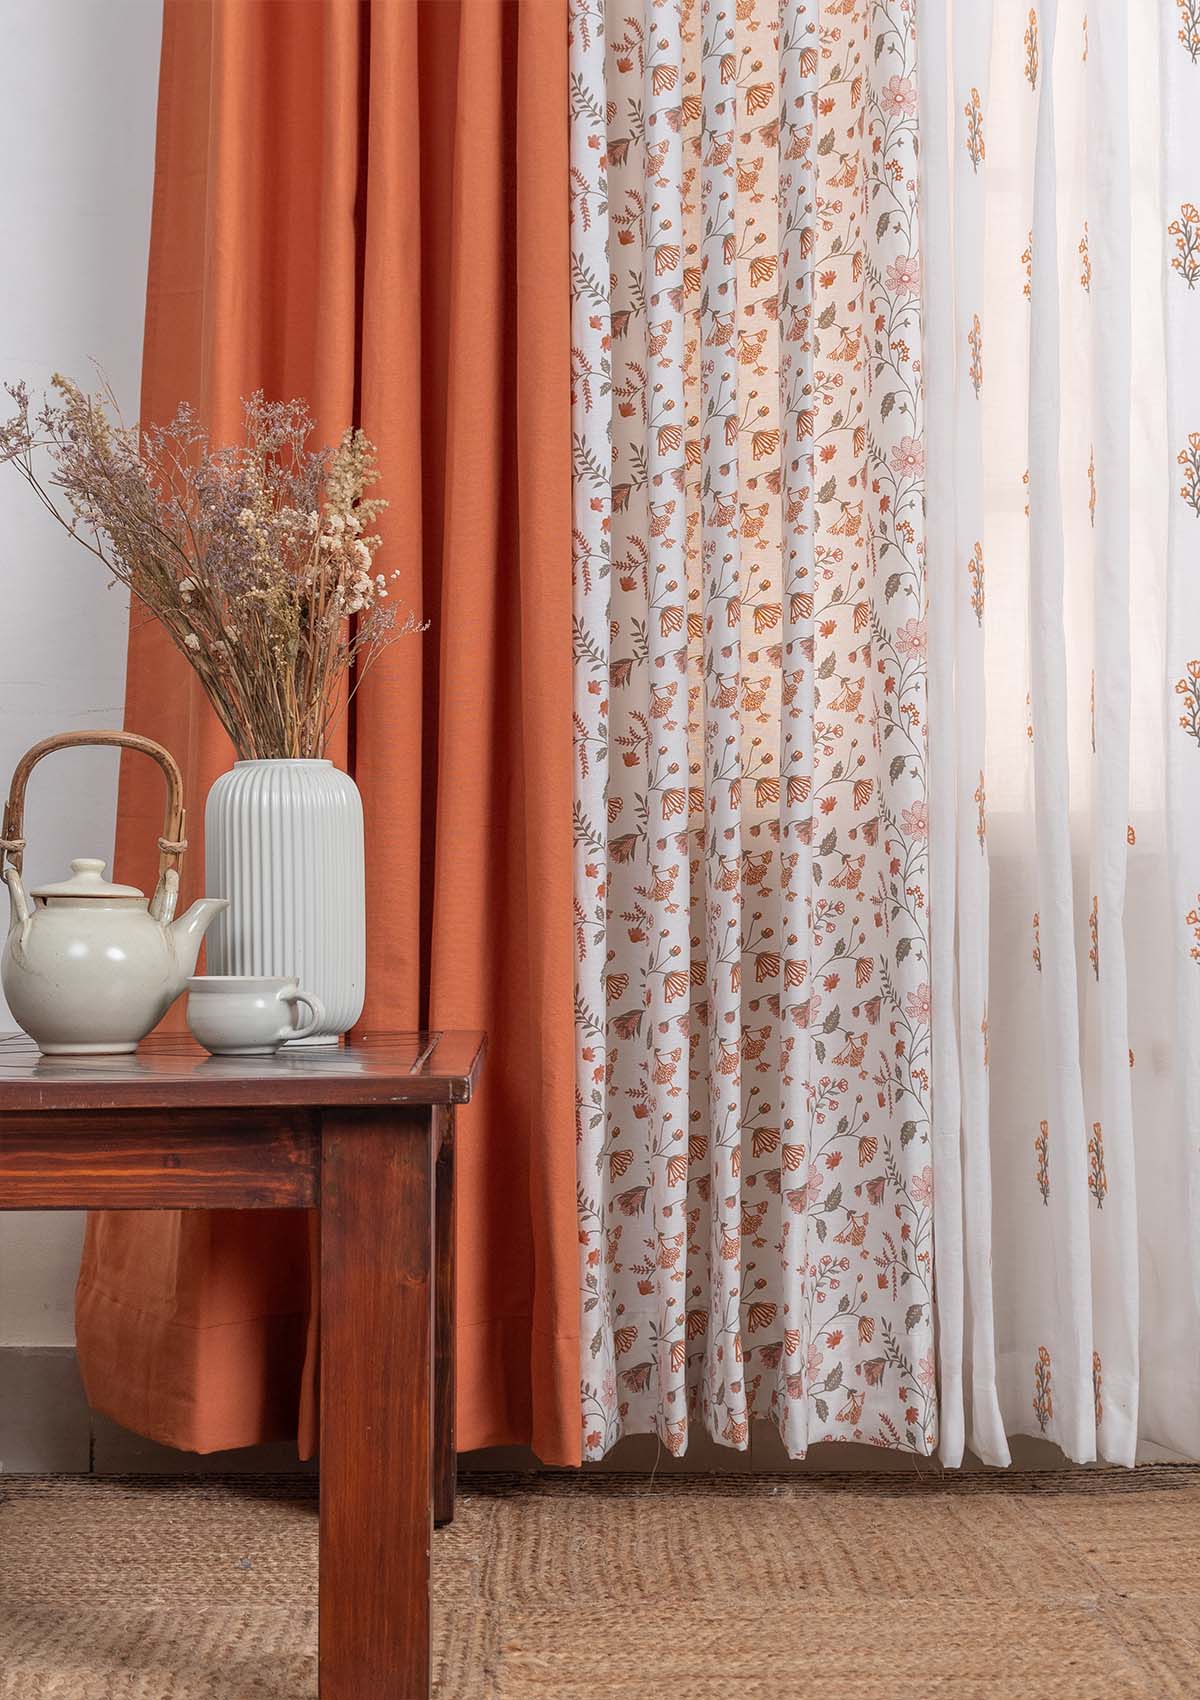 Solid Orange, forest bloom floral cotton curtain with Spring floral sheer 100% cotton curtains for living room - Set of 6